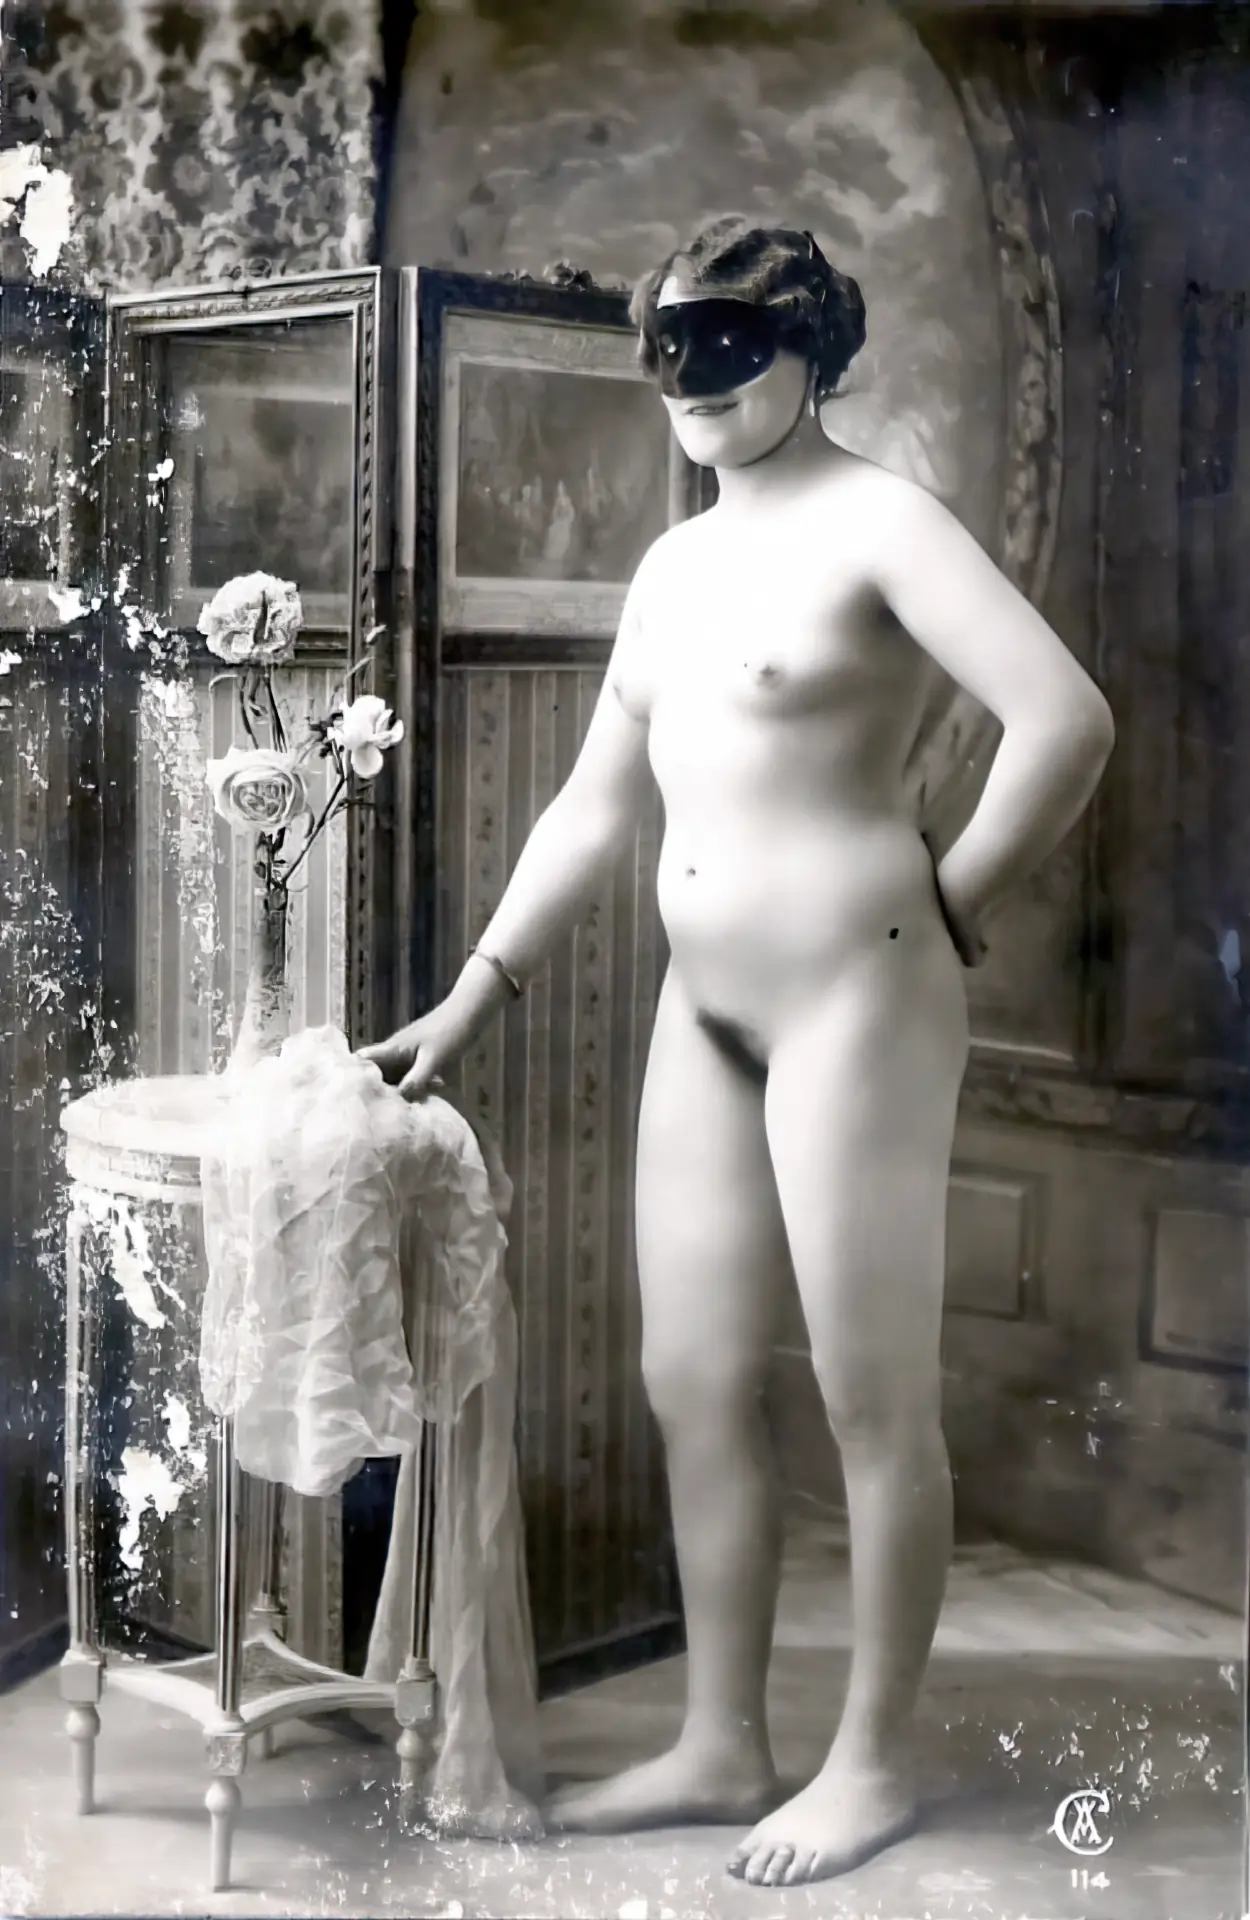 Vintage pregnant porn photo Chubby antique woman with a hairy pussy and very small boobs wears a mask